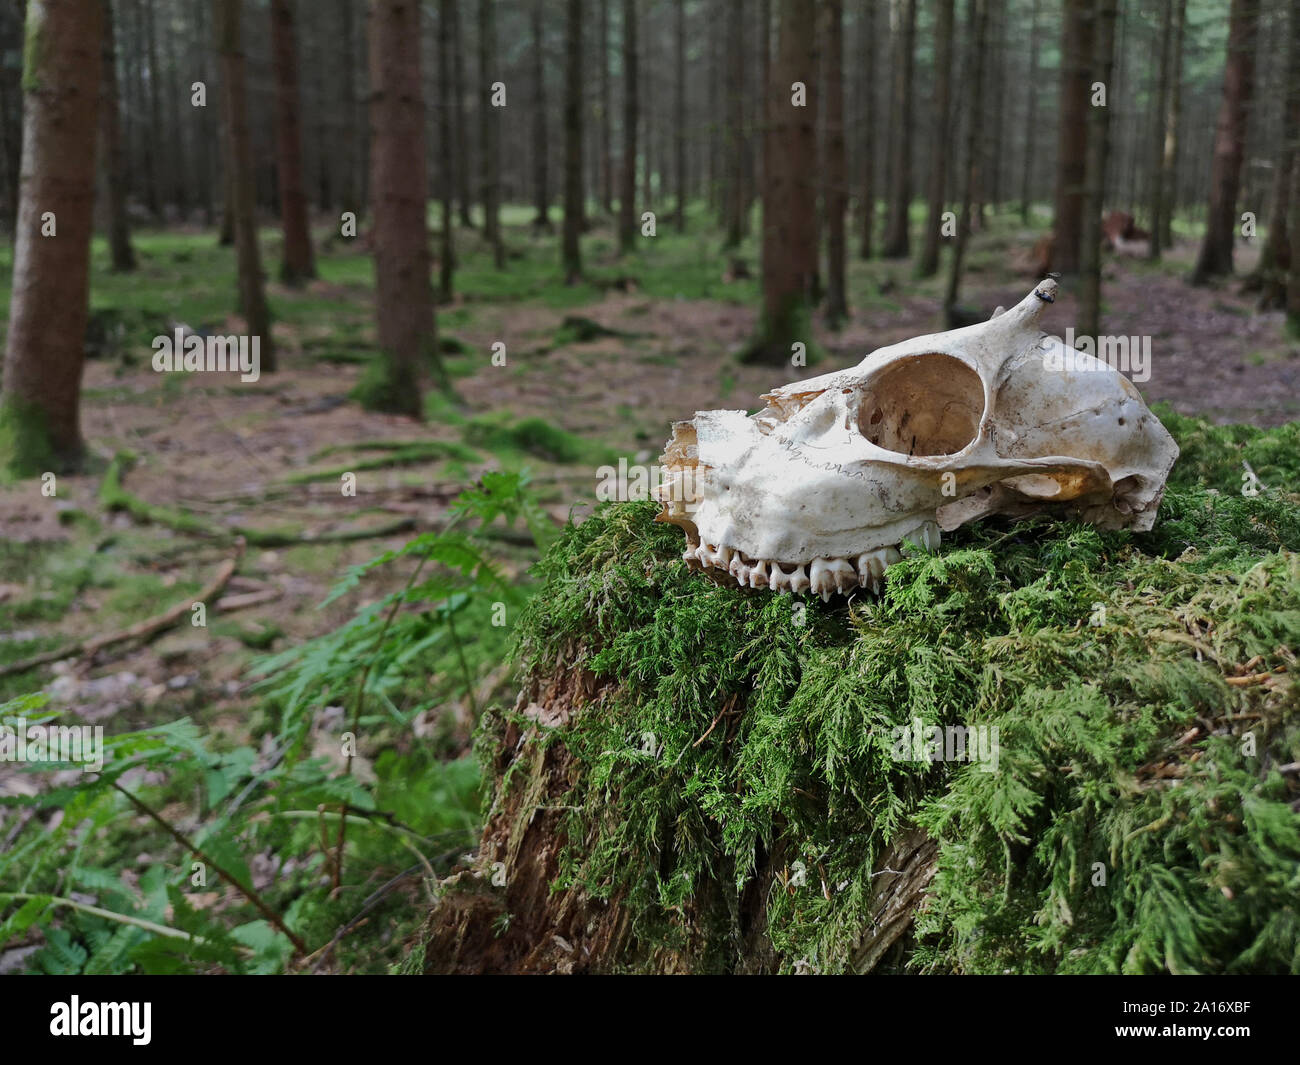 Skull of a young roe deer on moss in the forest with trees on the background Stock Photo